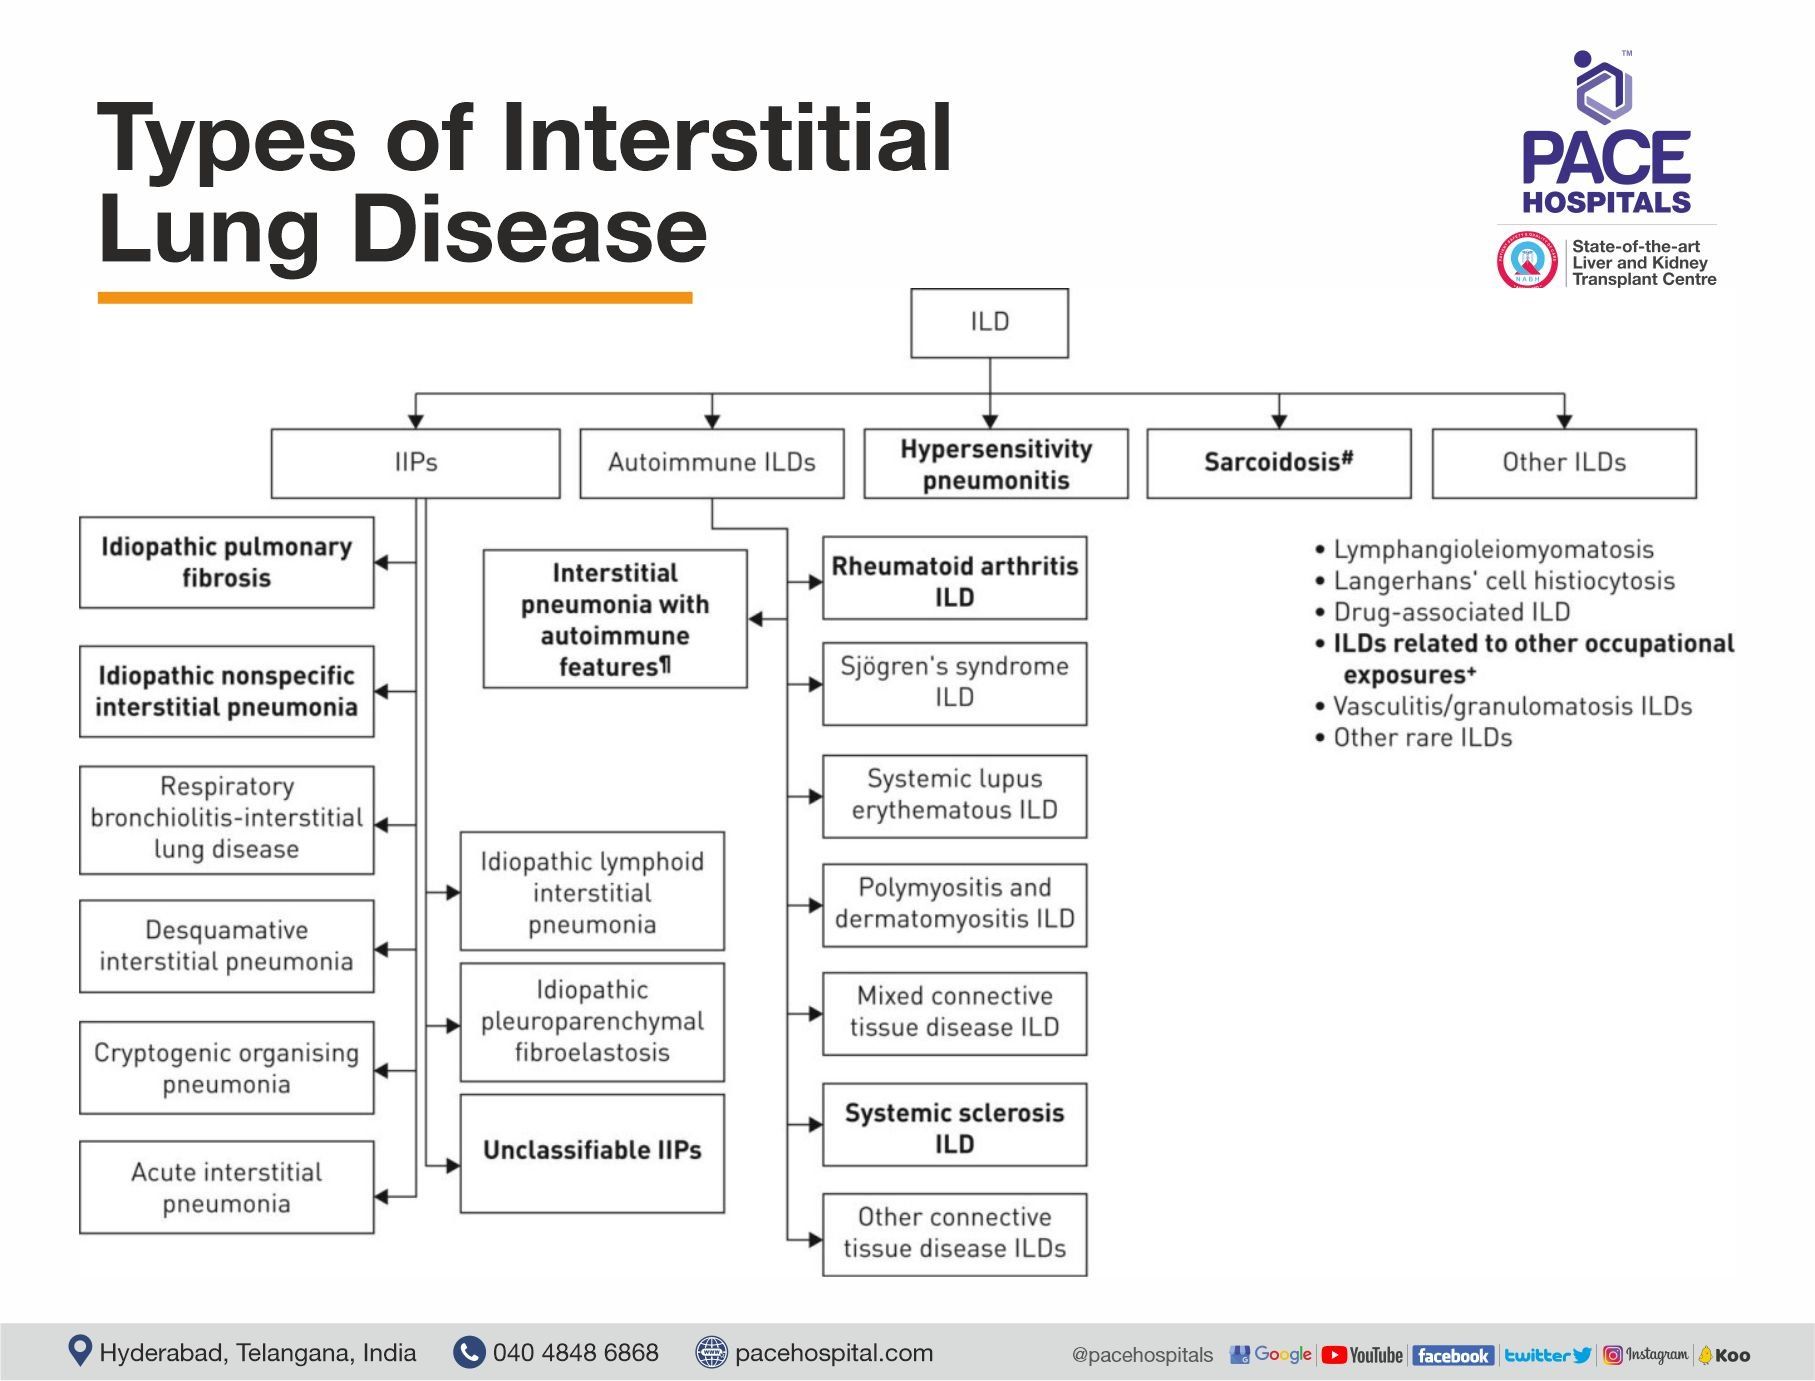 Types of Interstitial Lung Disease (ILD) | Pace Hospitals